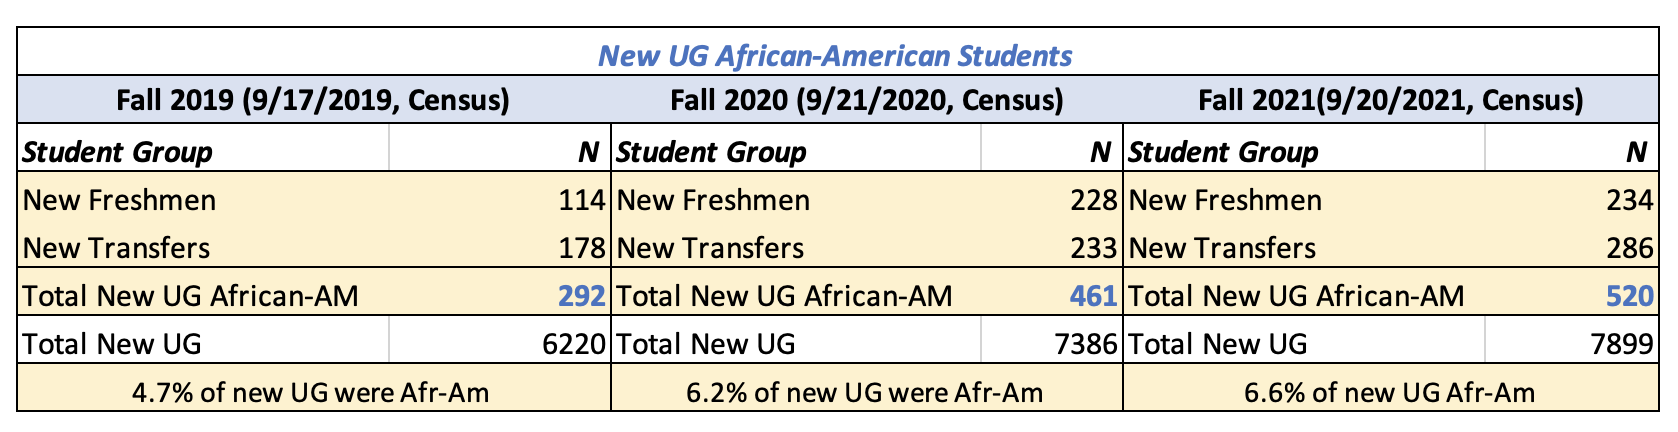 New Undergraduate African AMerican Students Data table from 2019 to 202